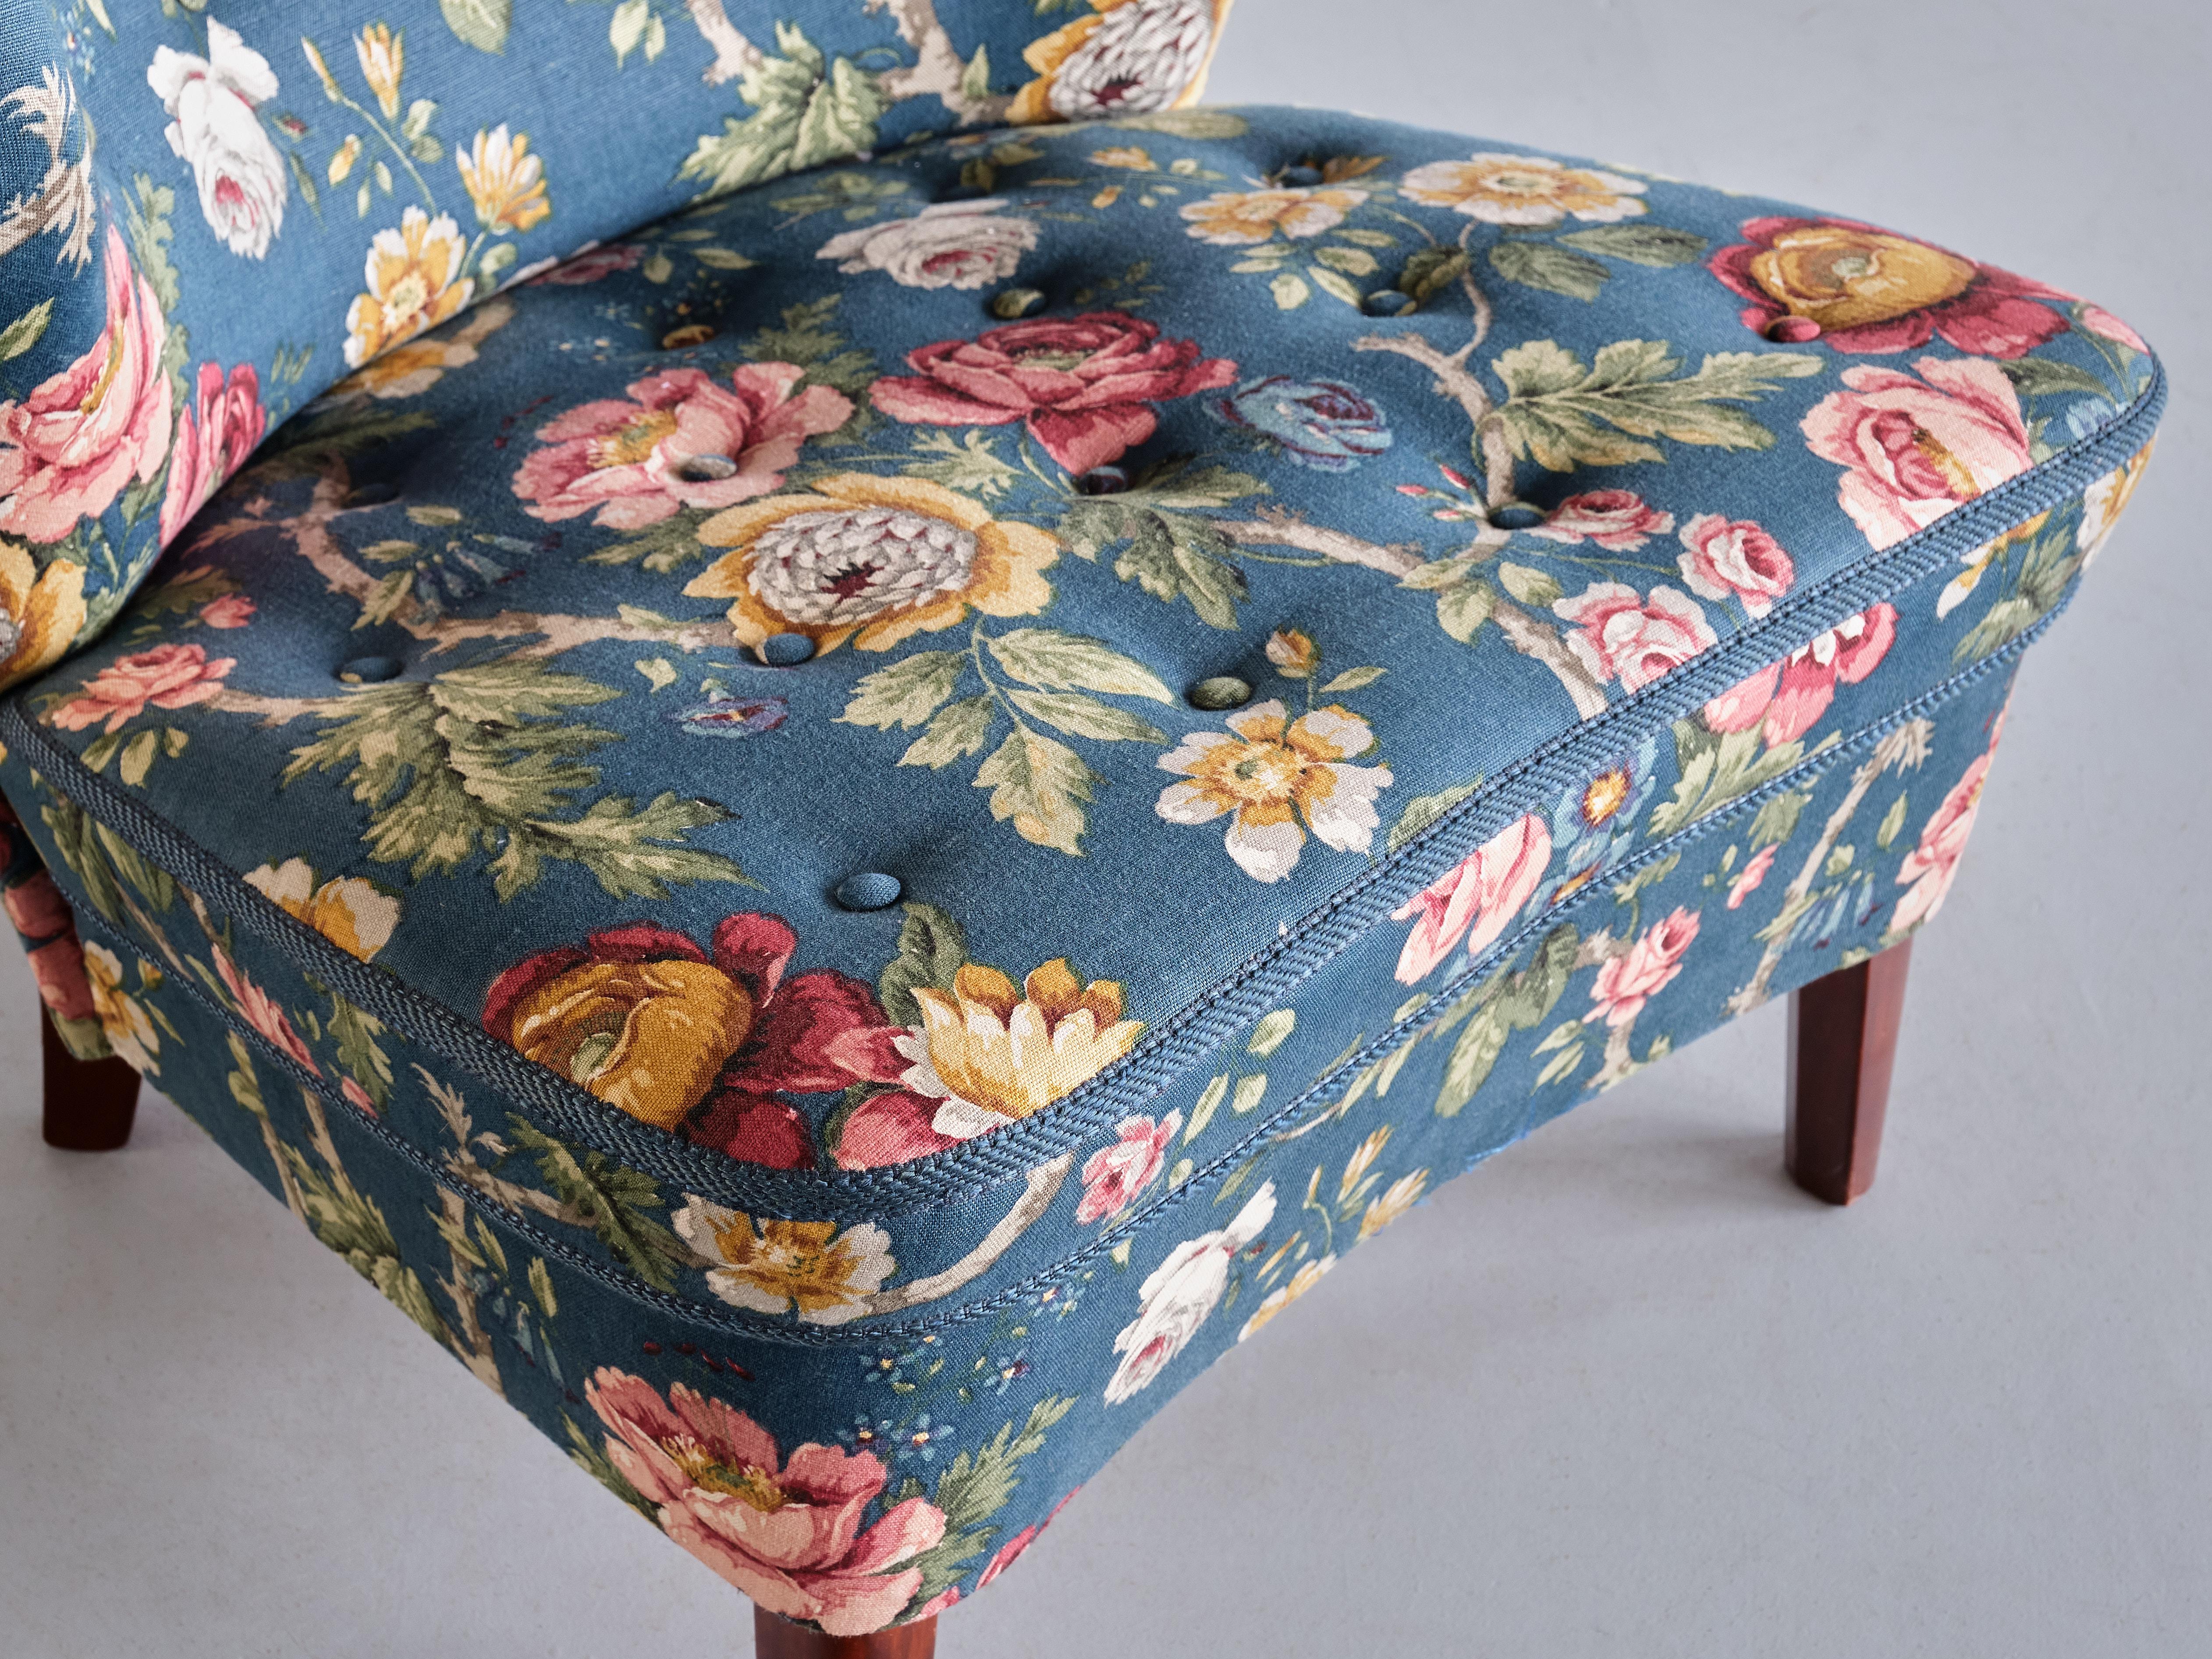 Gösta Jonsson Lounge Chair in Floral Fabric and Birch, Sweden, 1940s For Sale 2